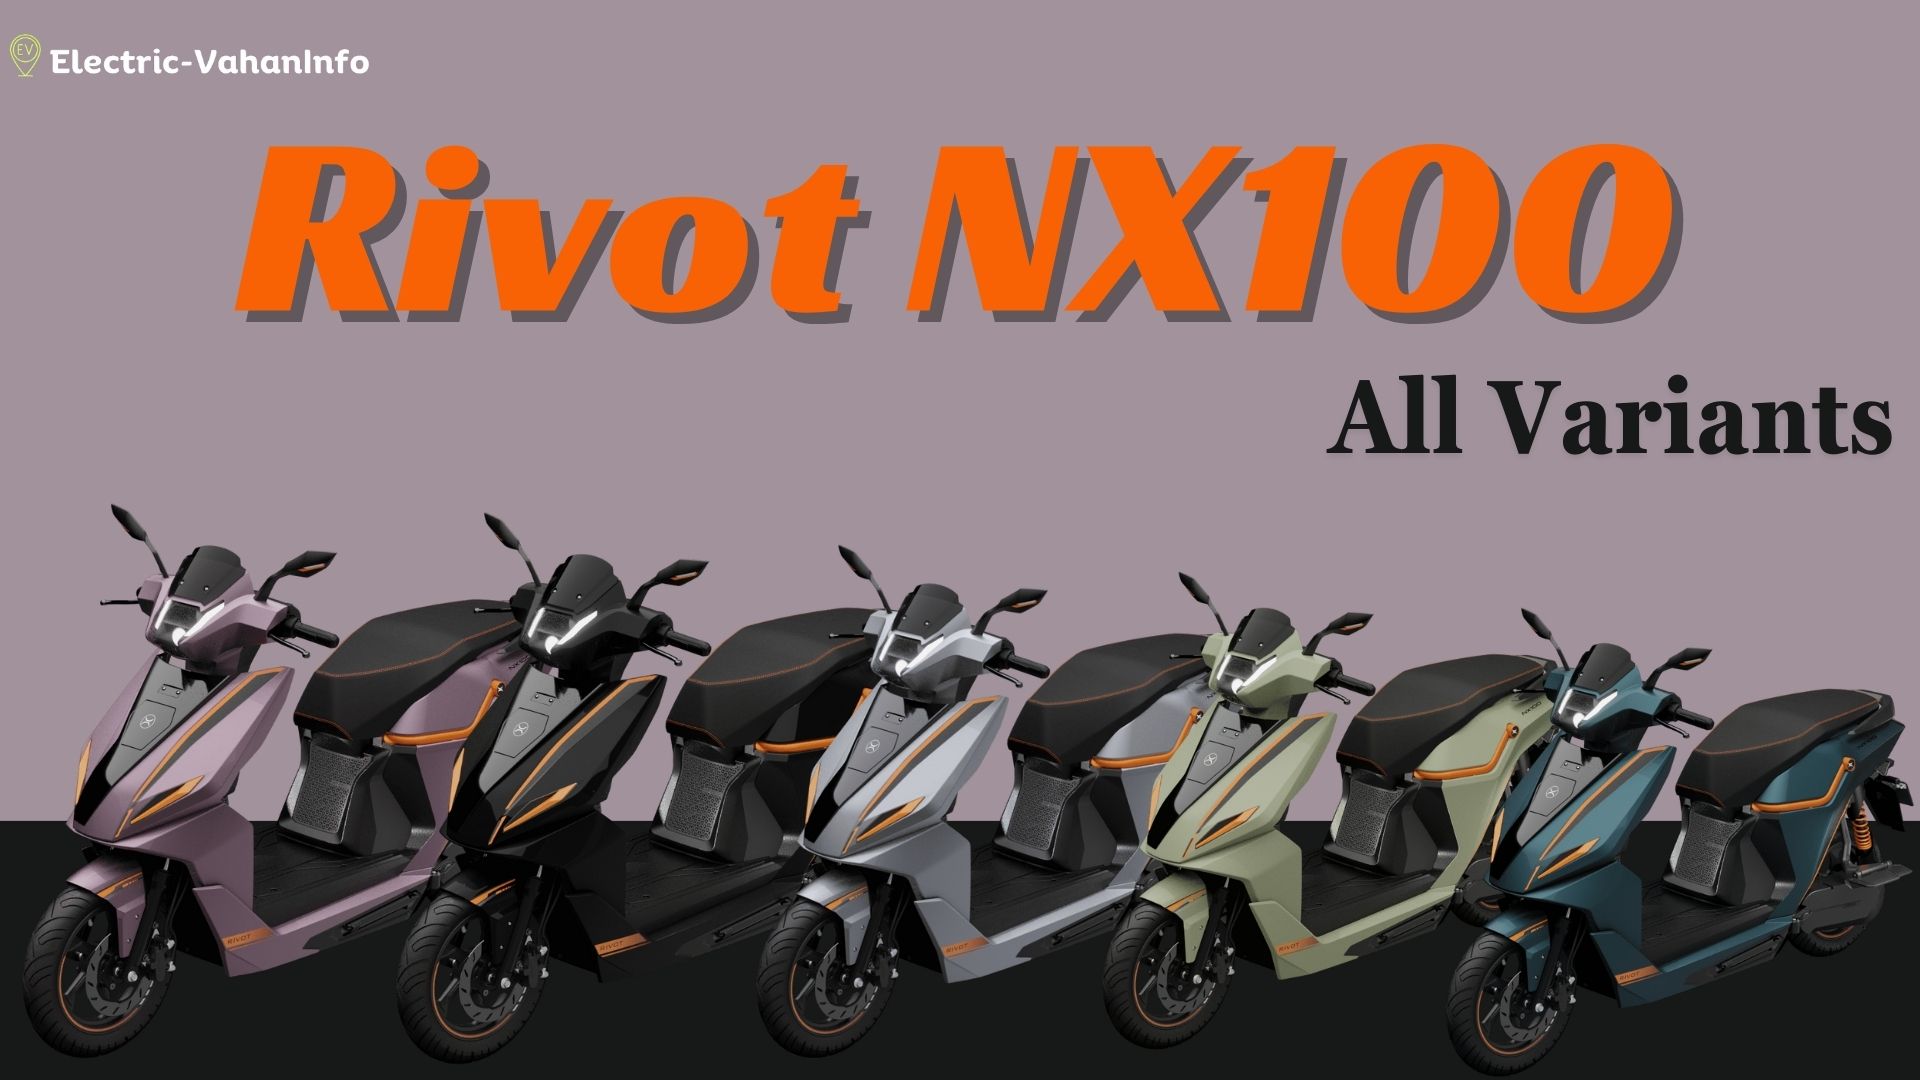 https://electric-vahaninfo.com/rivot-nx100-all-variants-explain-with-price-range-and-features/